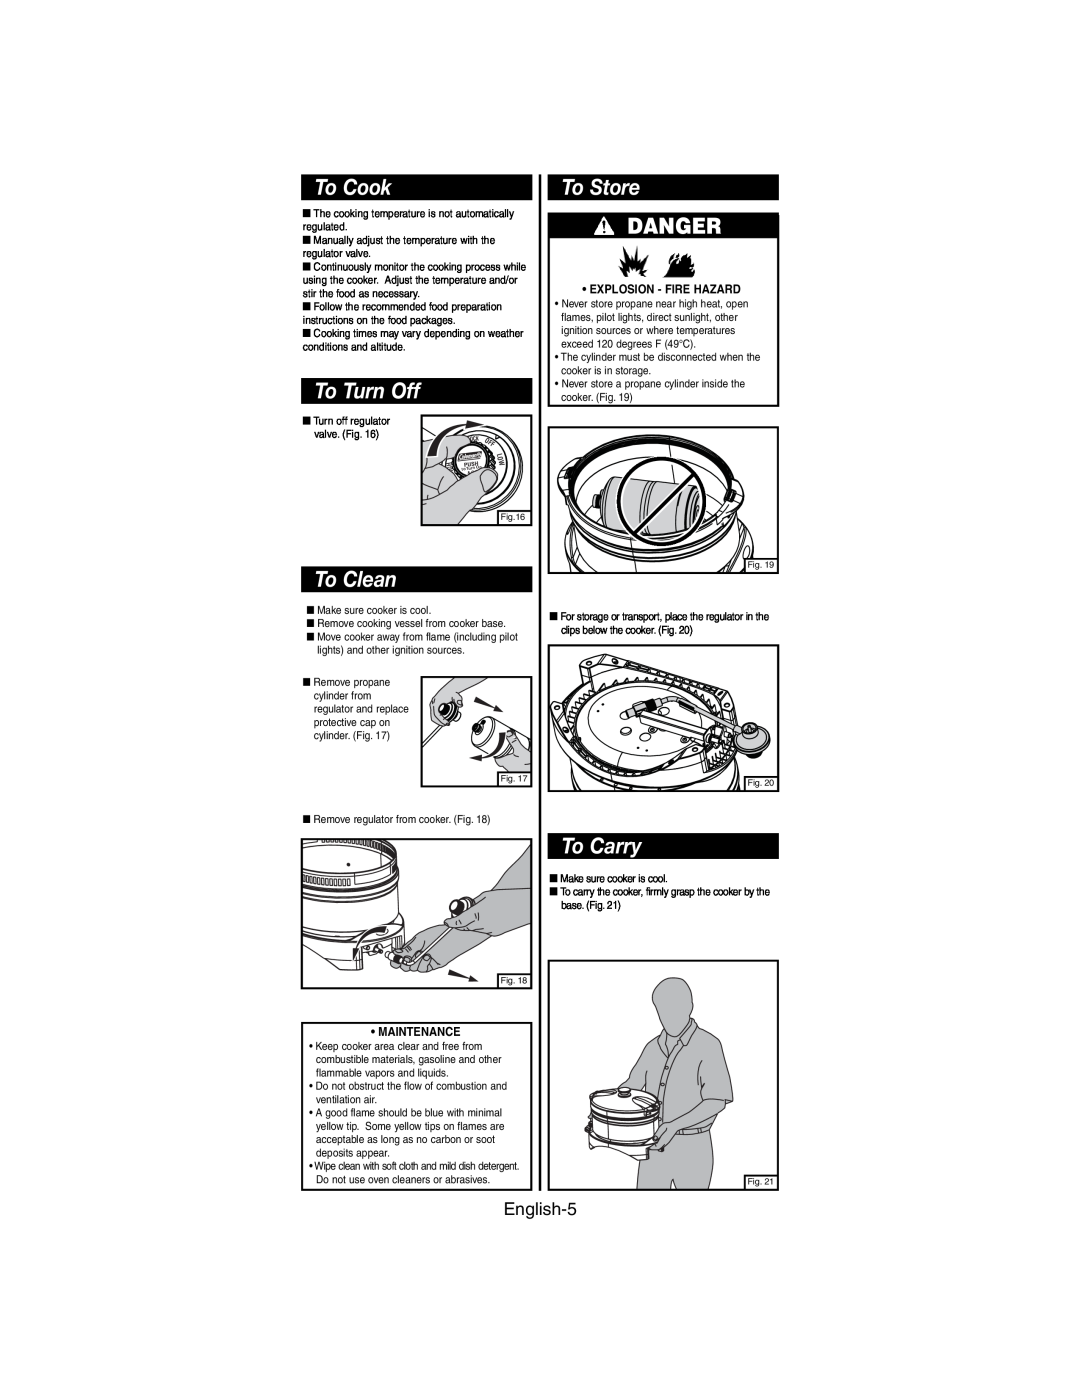 Coleman 9935 series manual To Cook, To Turn Off, To Store, To Clean, To Carry, English-5, Danger, Explosion - Fire Hazard 